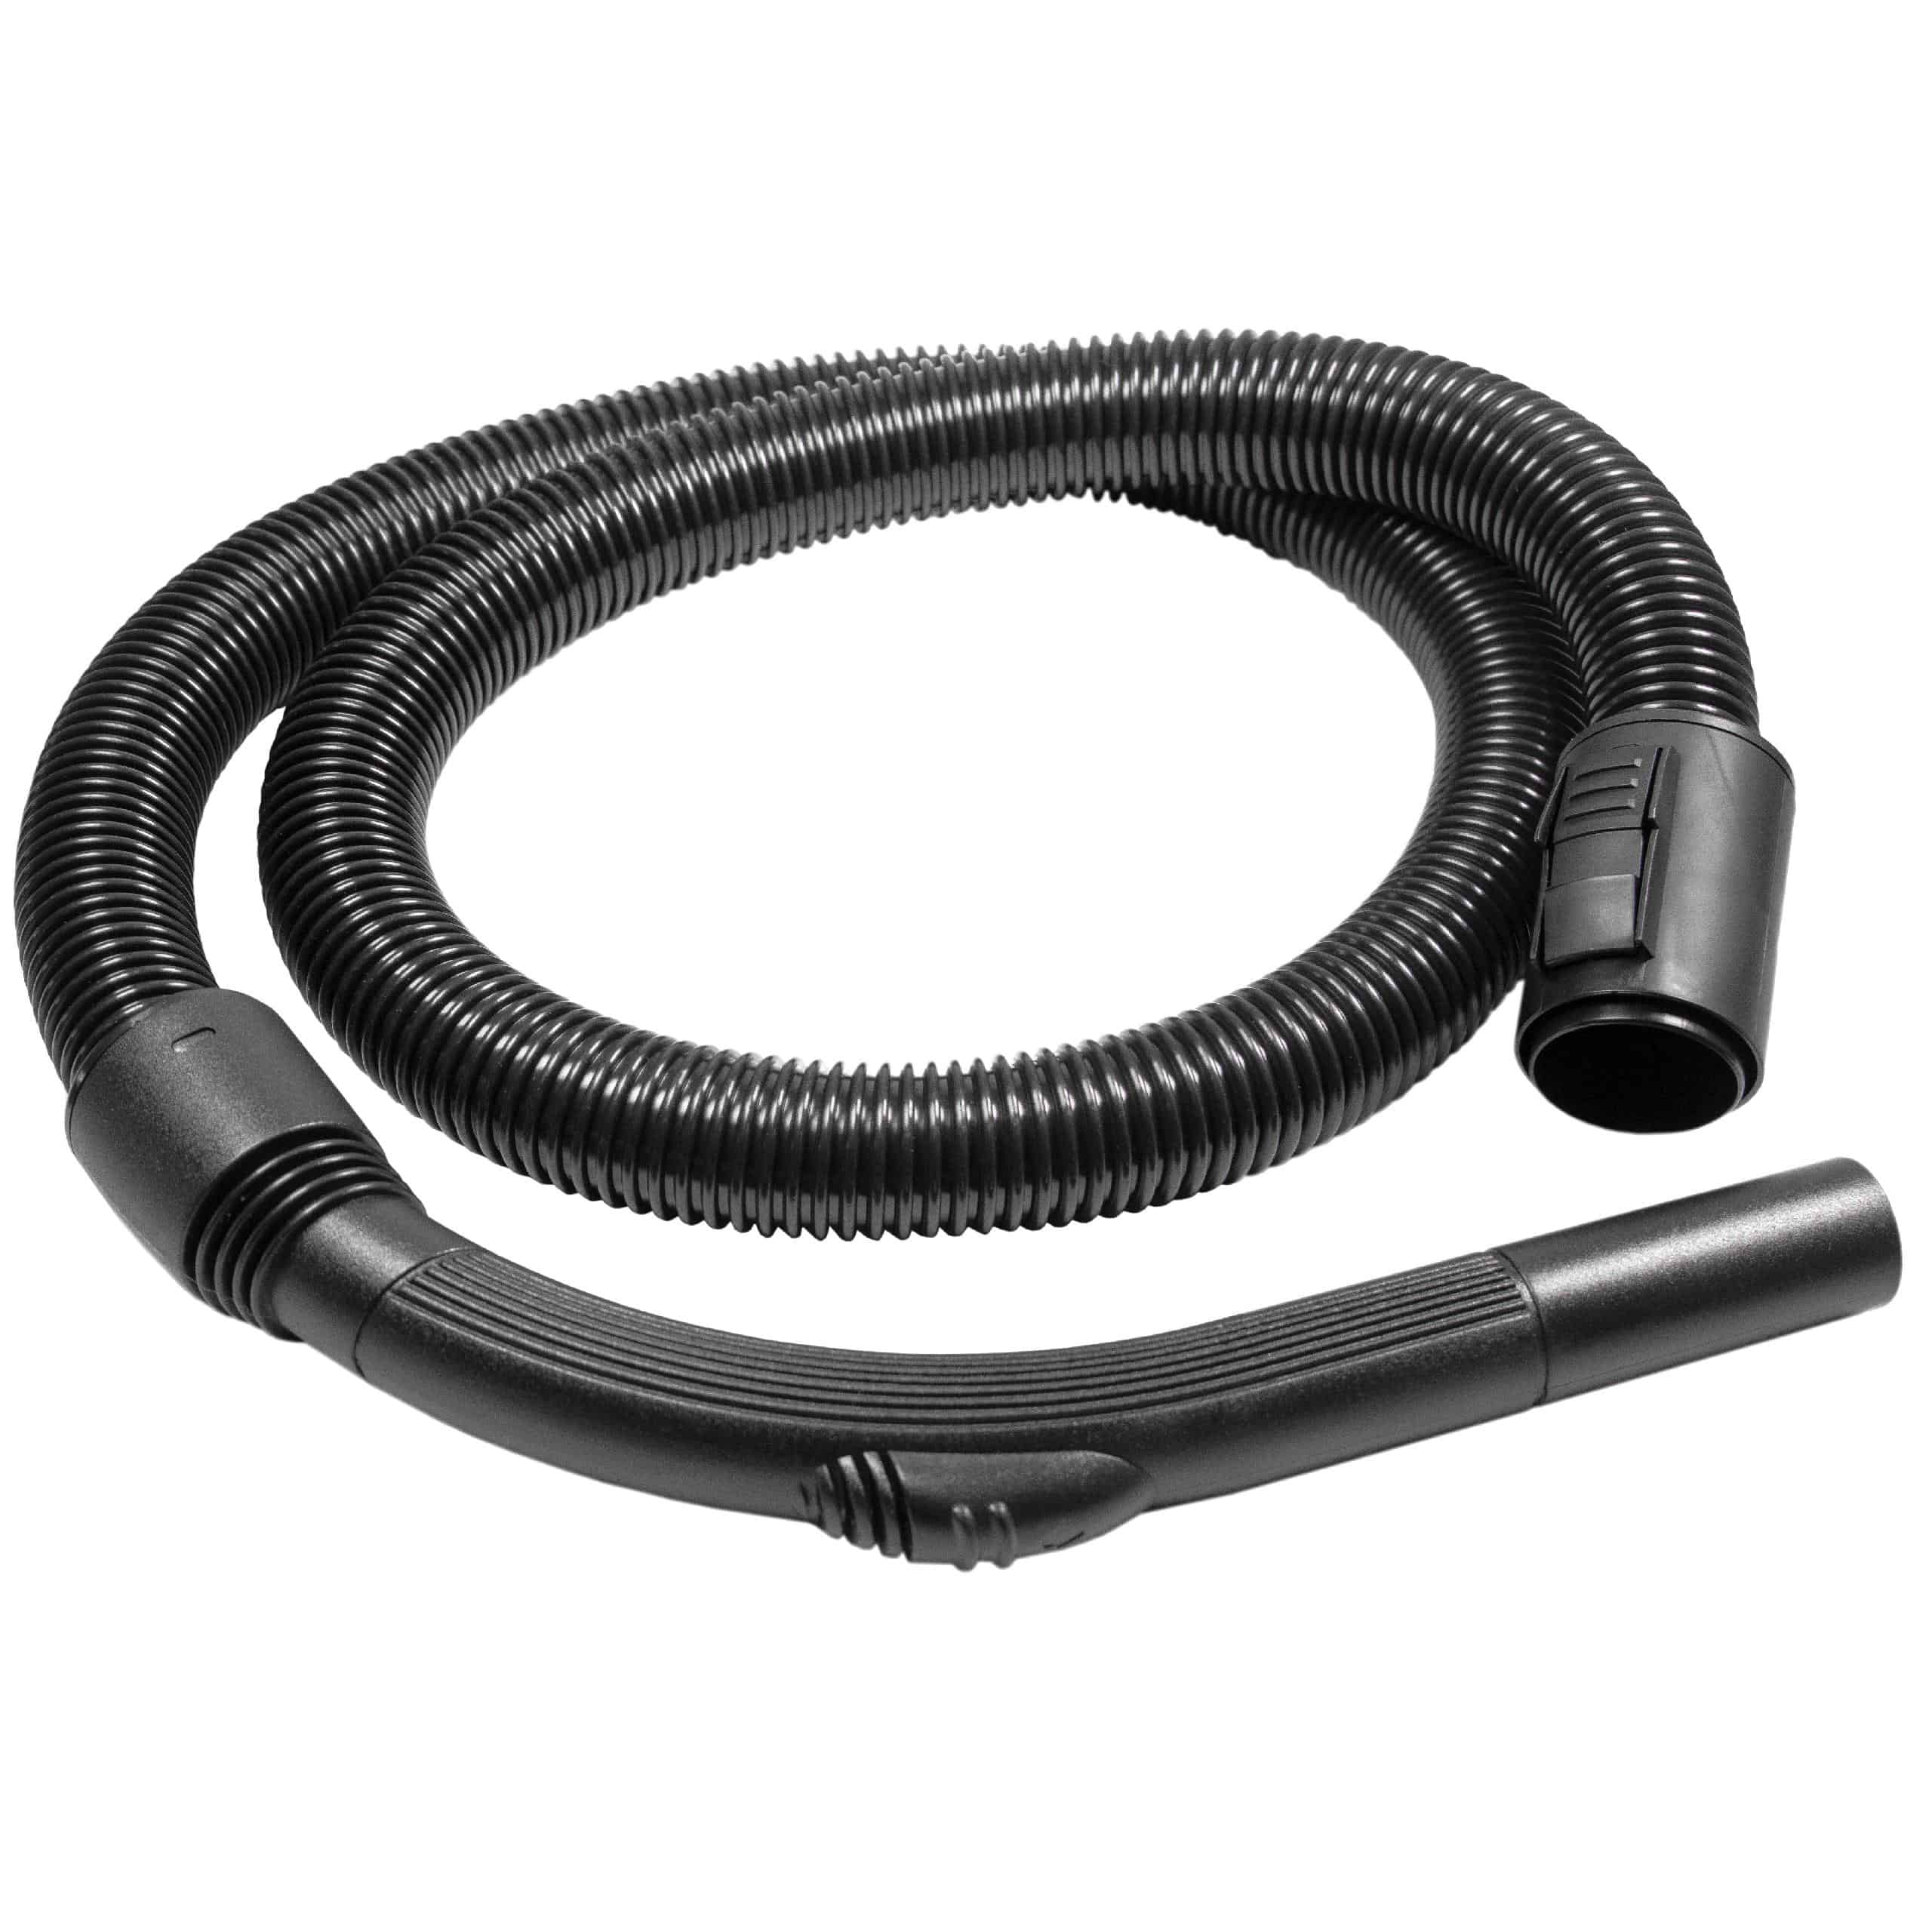 Hose as Replacement for Kärcher 1.629-101.0 etc. - 200 cm long (with Handle)